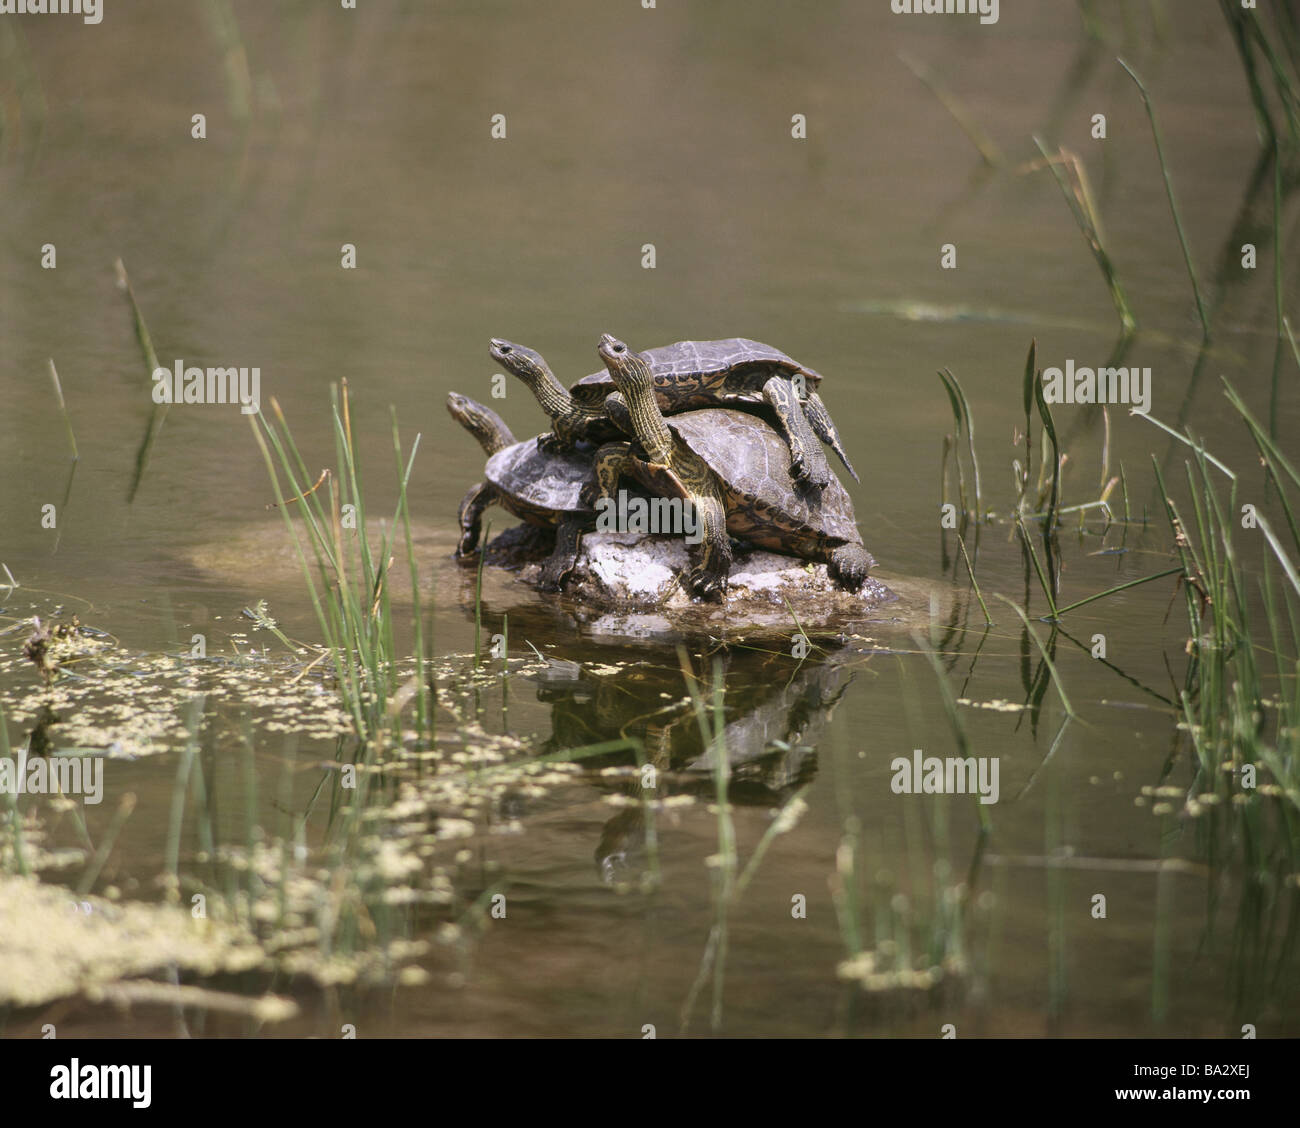 Waters stone Kaspische water-turtles Mauremys caspica young one on top of the other water rock animals reptiles turtles Stock Photo